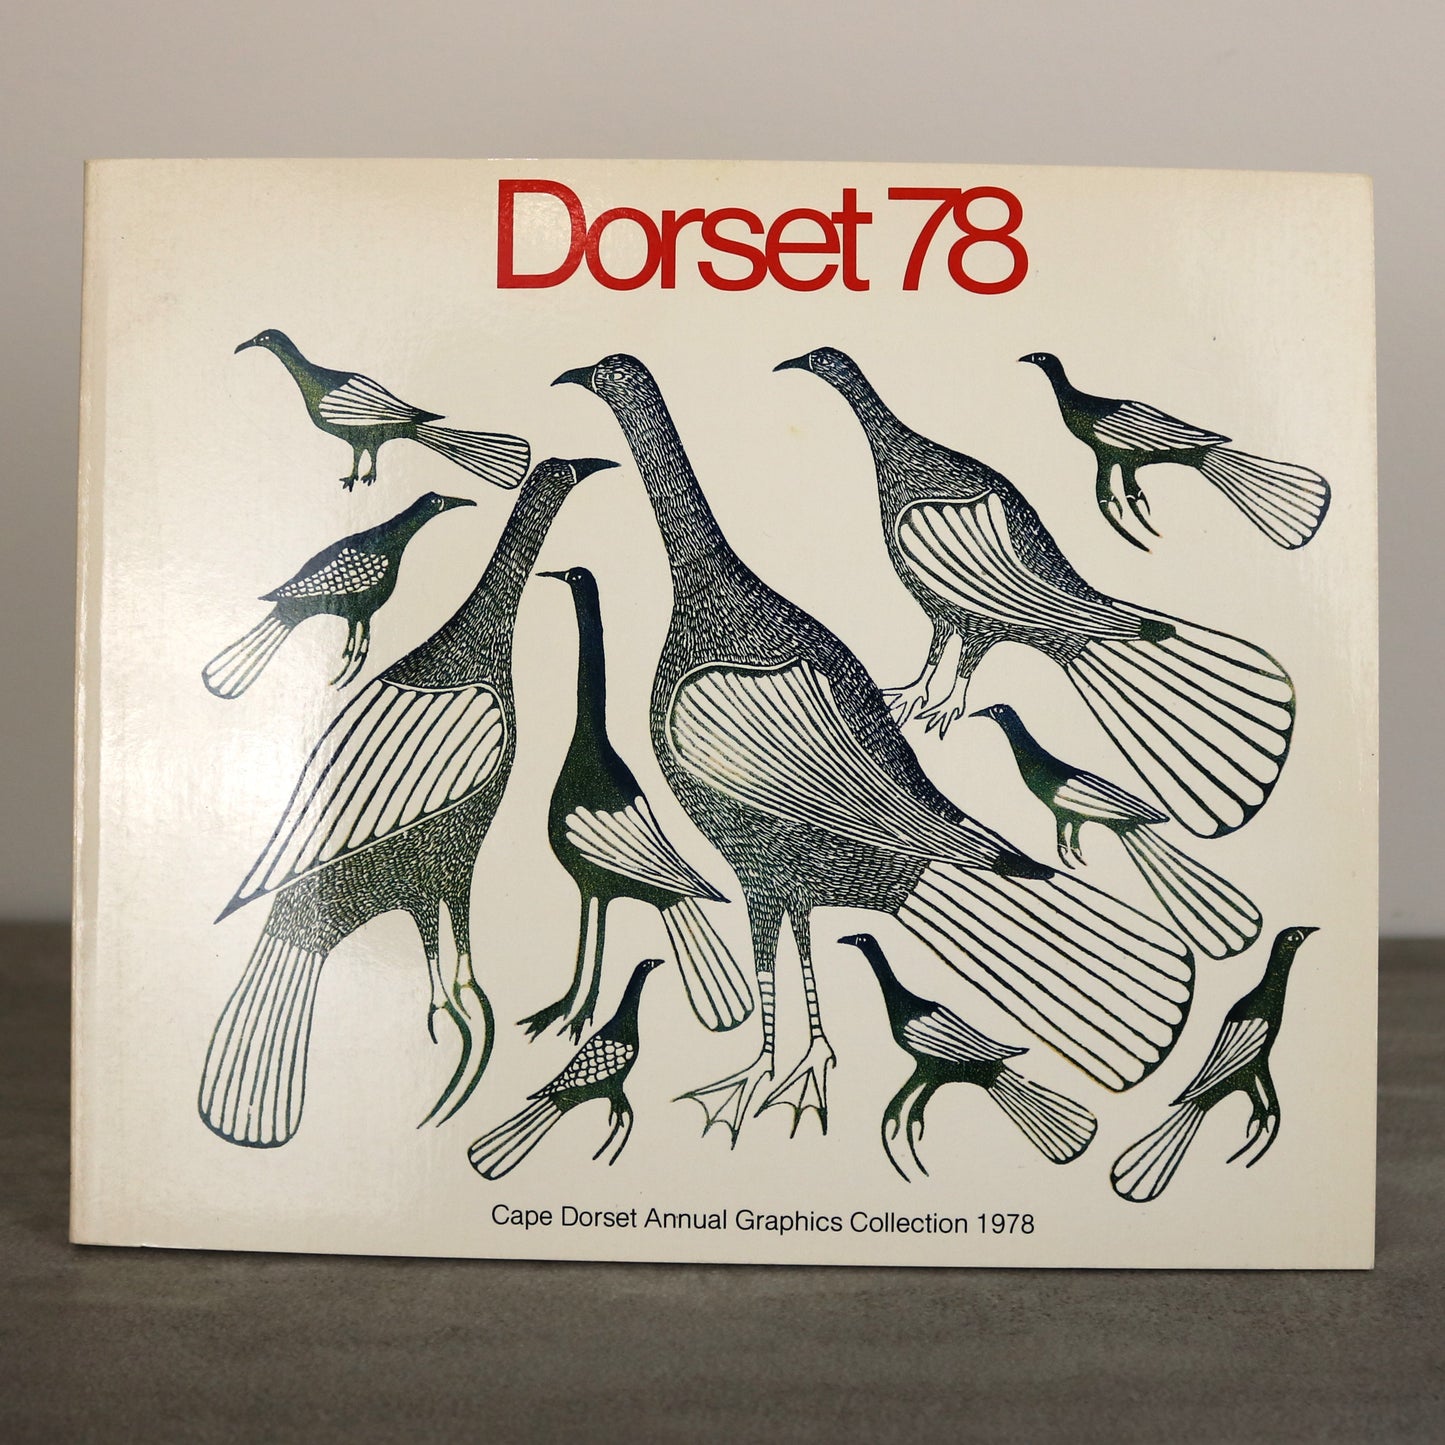 Dorset 78 Annual Graphics Collection Art Indigenous Printmaking Used Book